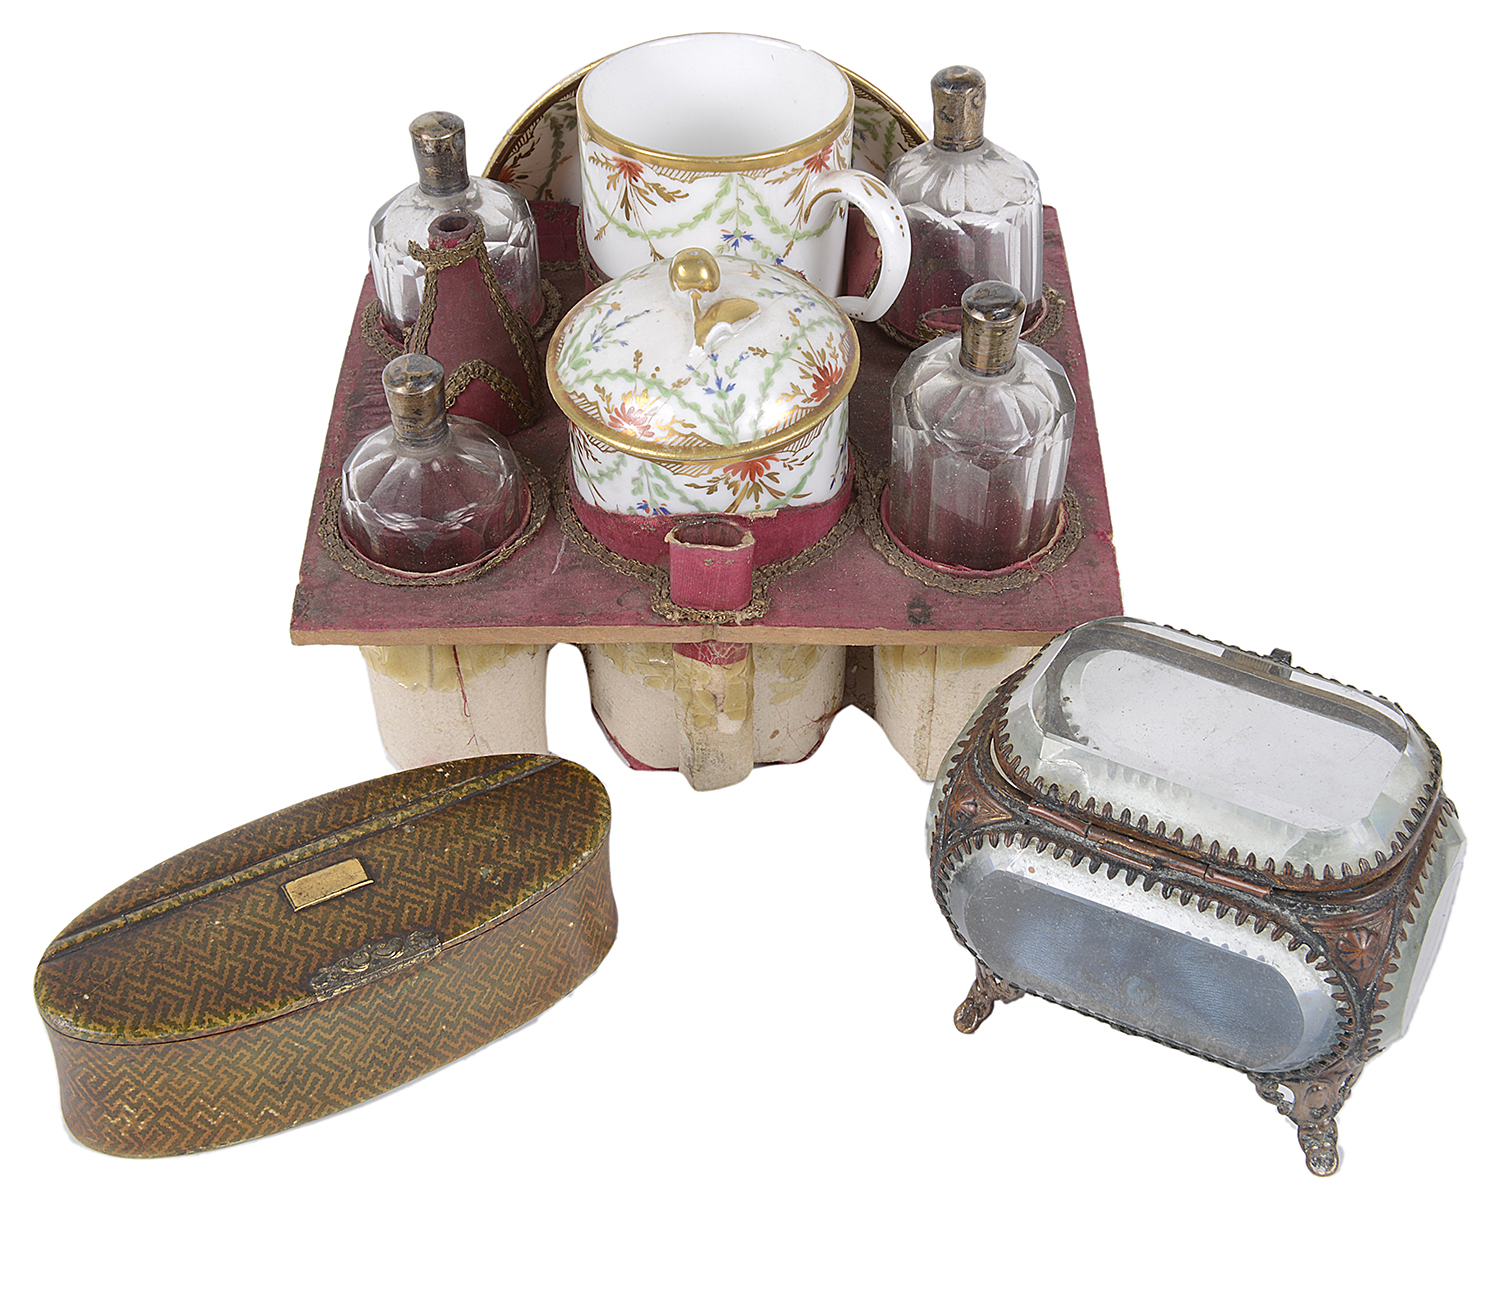 A Continental porcelain and glass travelling set, c1900